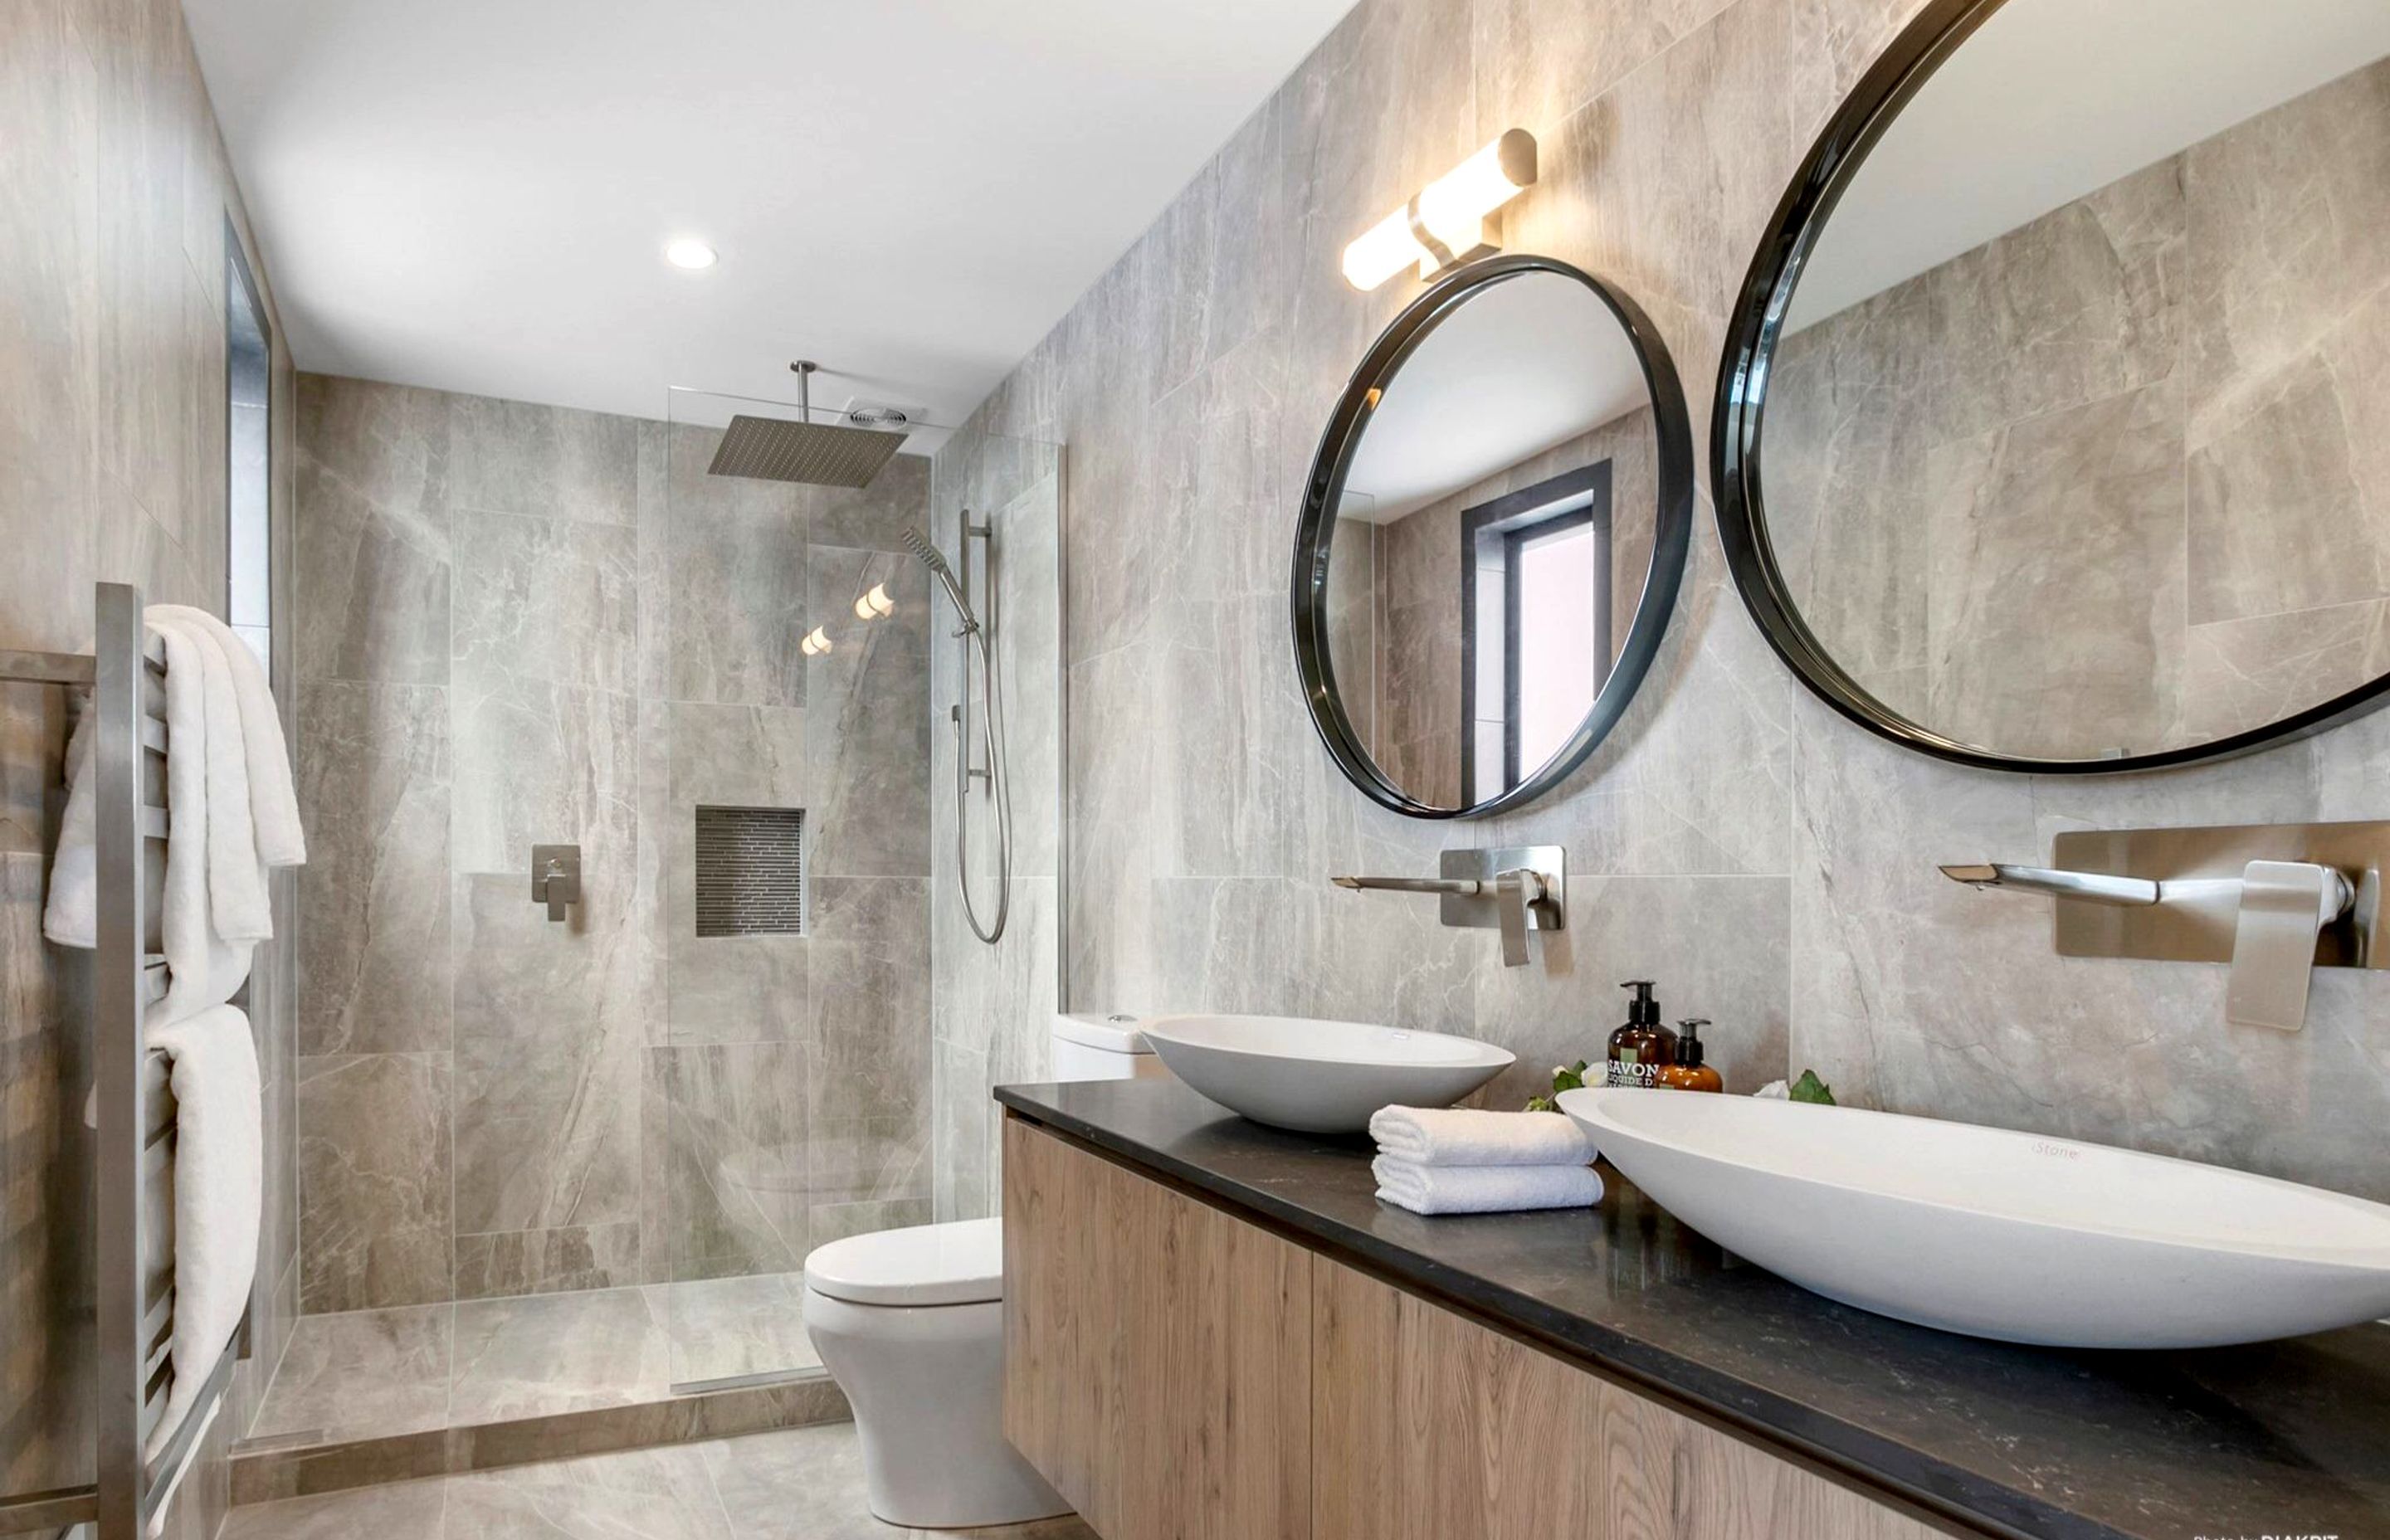 St Heliers new build with luxury ensuite , bathrooms + powder room designed by Lizzie Kerby from Lizzie K &amp; Co